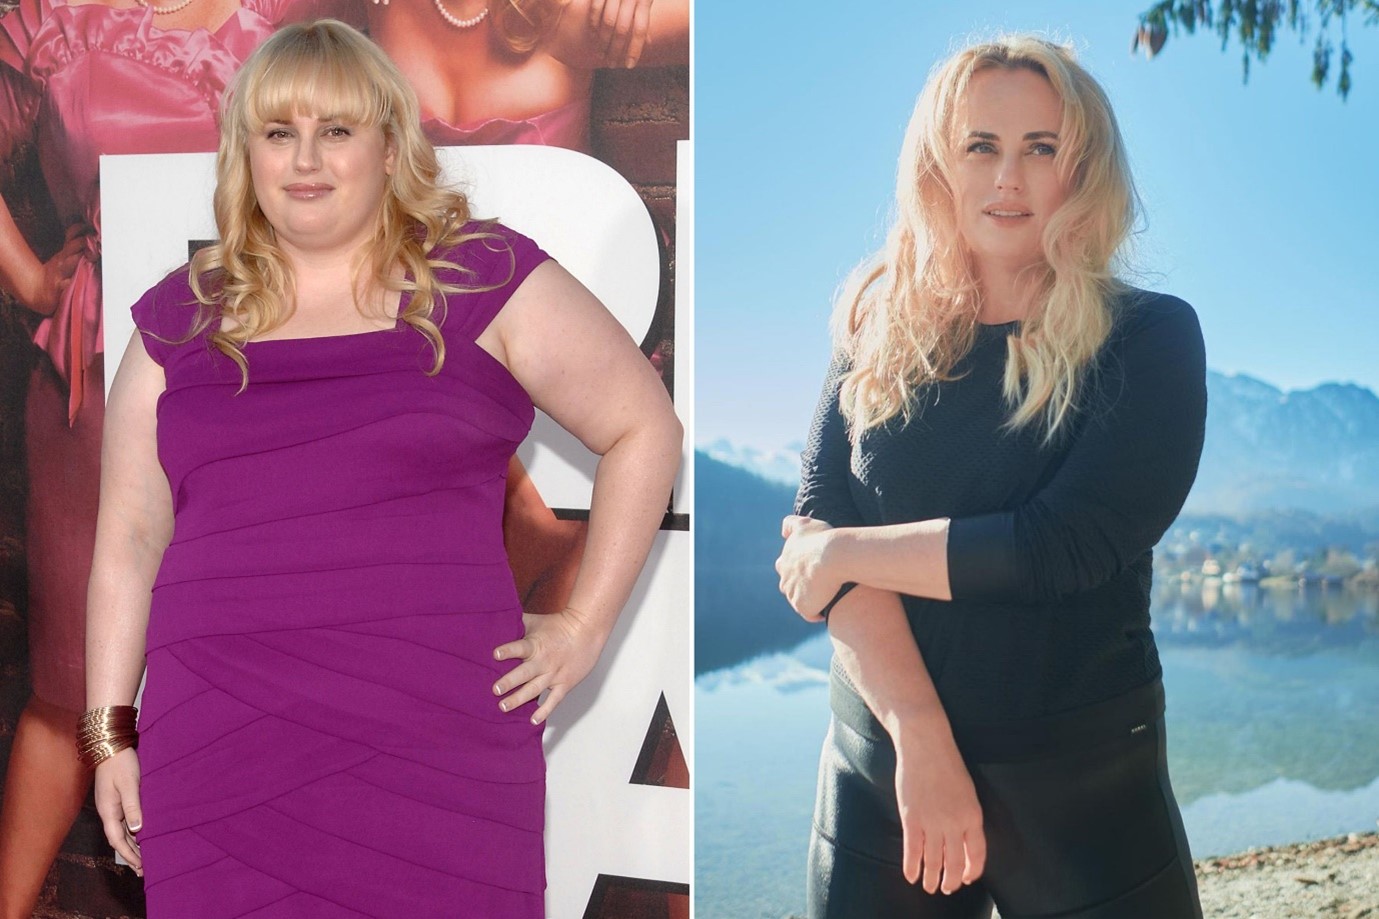 Rebel Wilson Weight Loss: The Pitch Perfect star sheds the pounds.